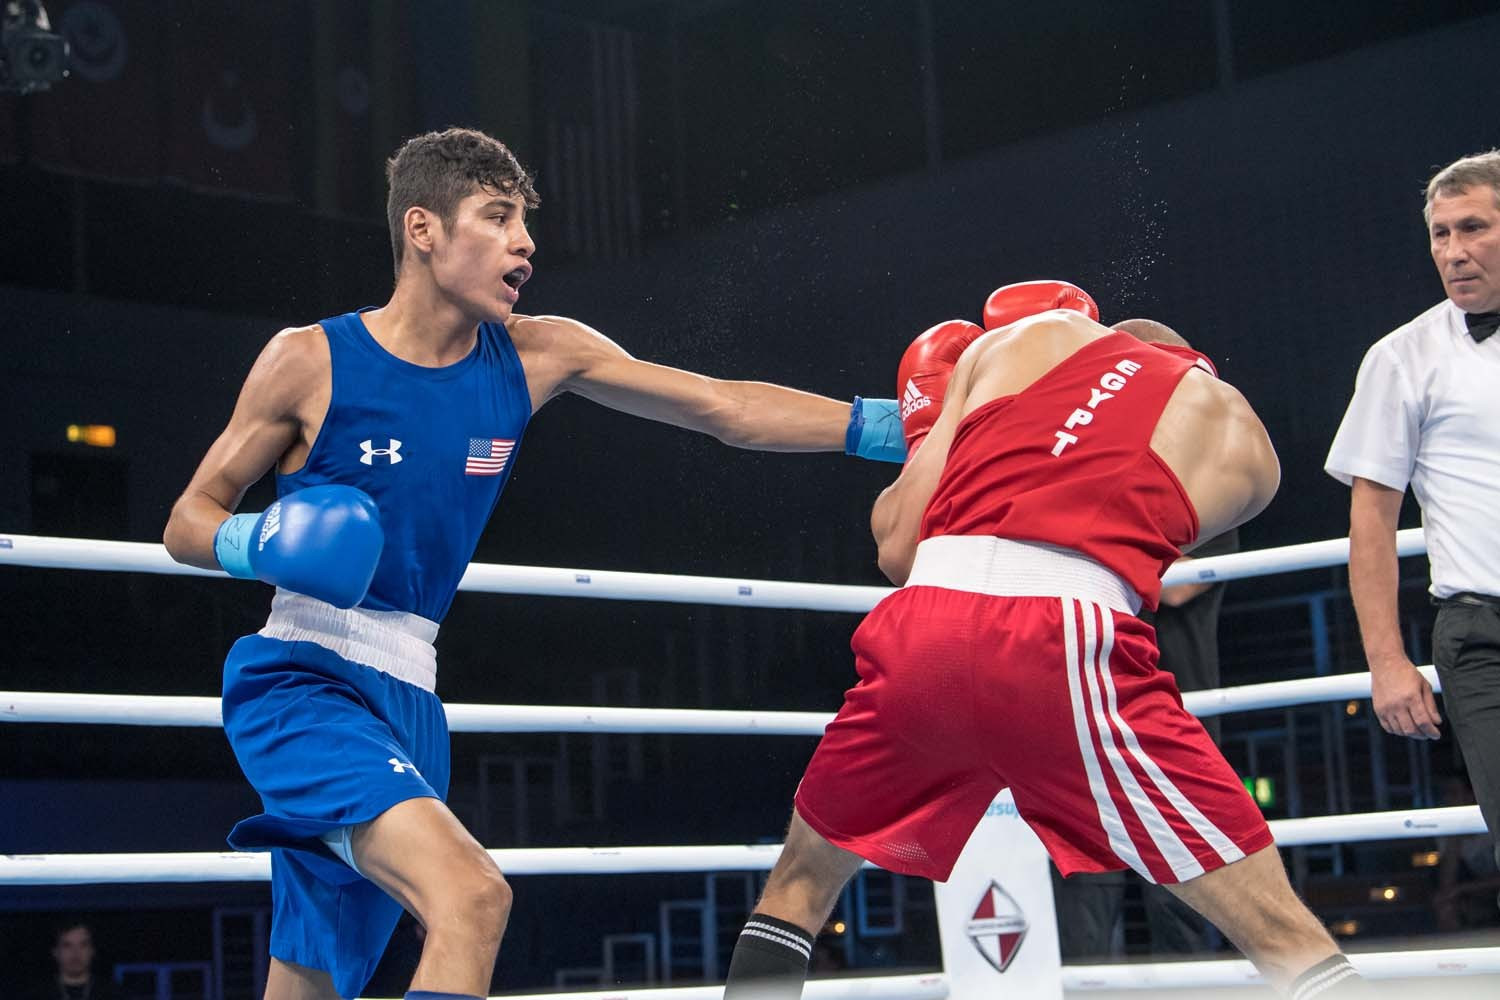 The United States' Freudis Rojas advanced to the penultimate round of the light welterweight event with an impressive victory over Egypt's Eslam Mohamed ©AIBA